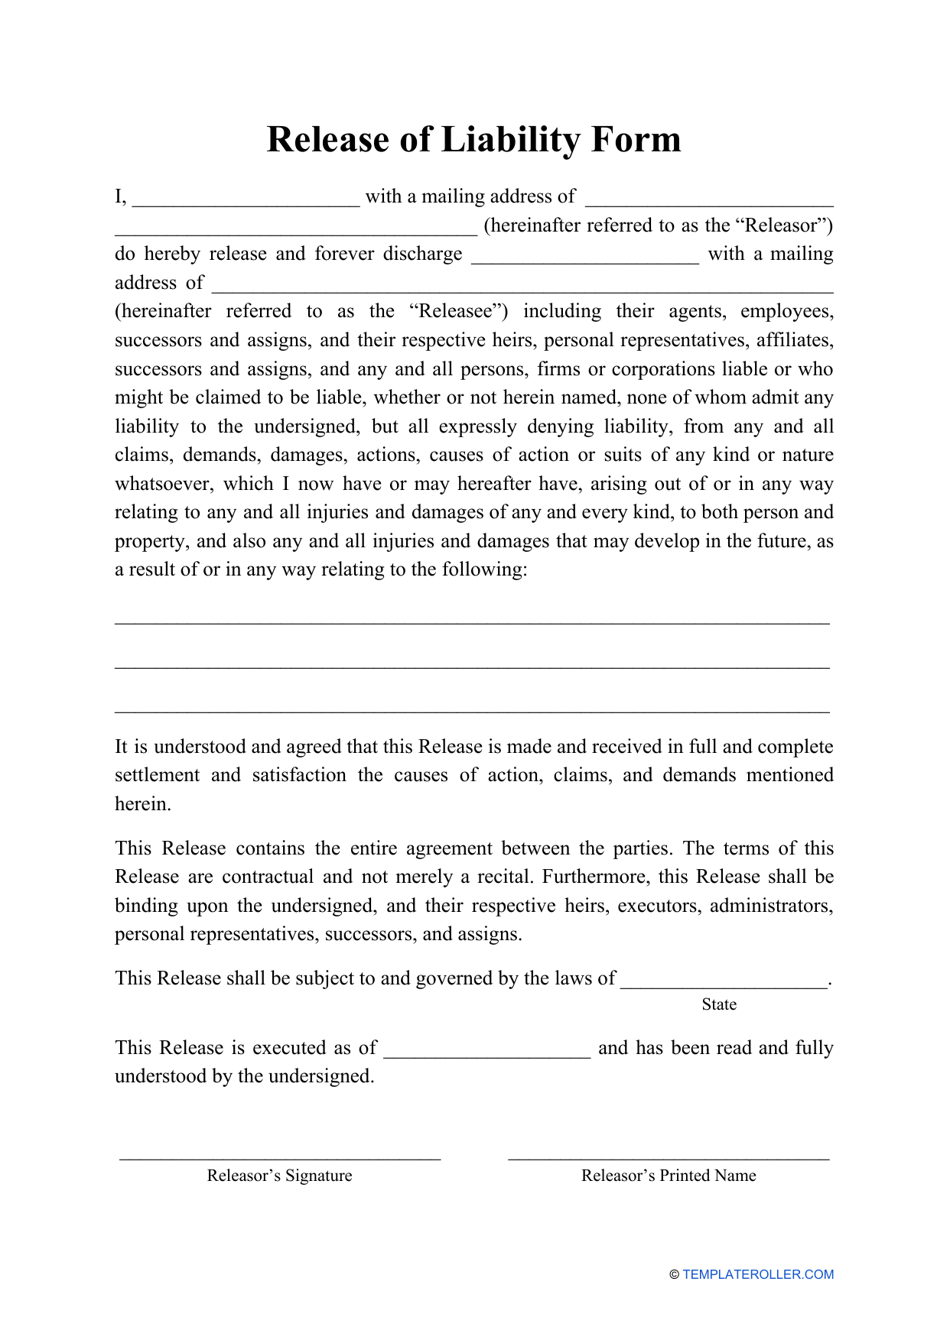 release-of-liability-form-fill-out-sign-online-and-download-pdf-templateroller